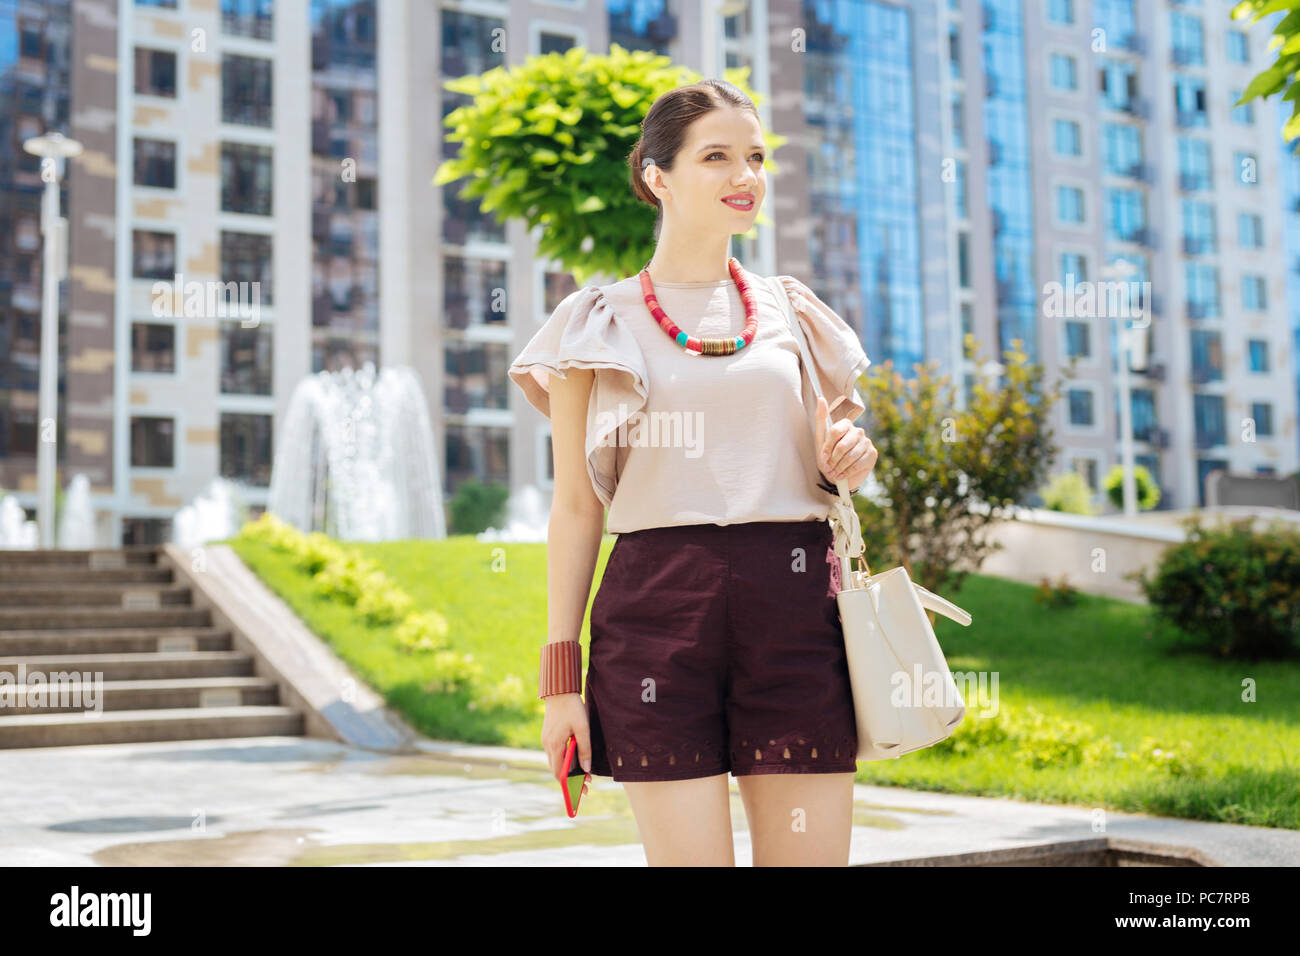 Delighted young woman having a walk Stock Photo